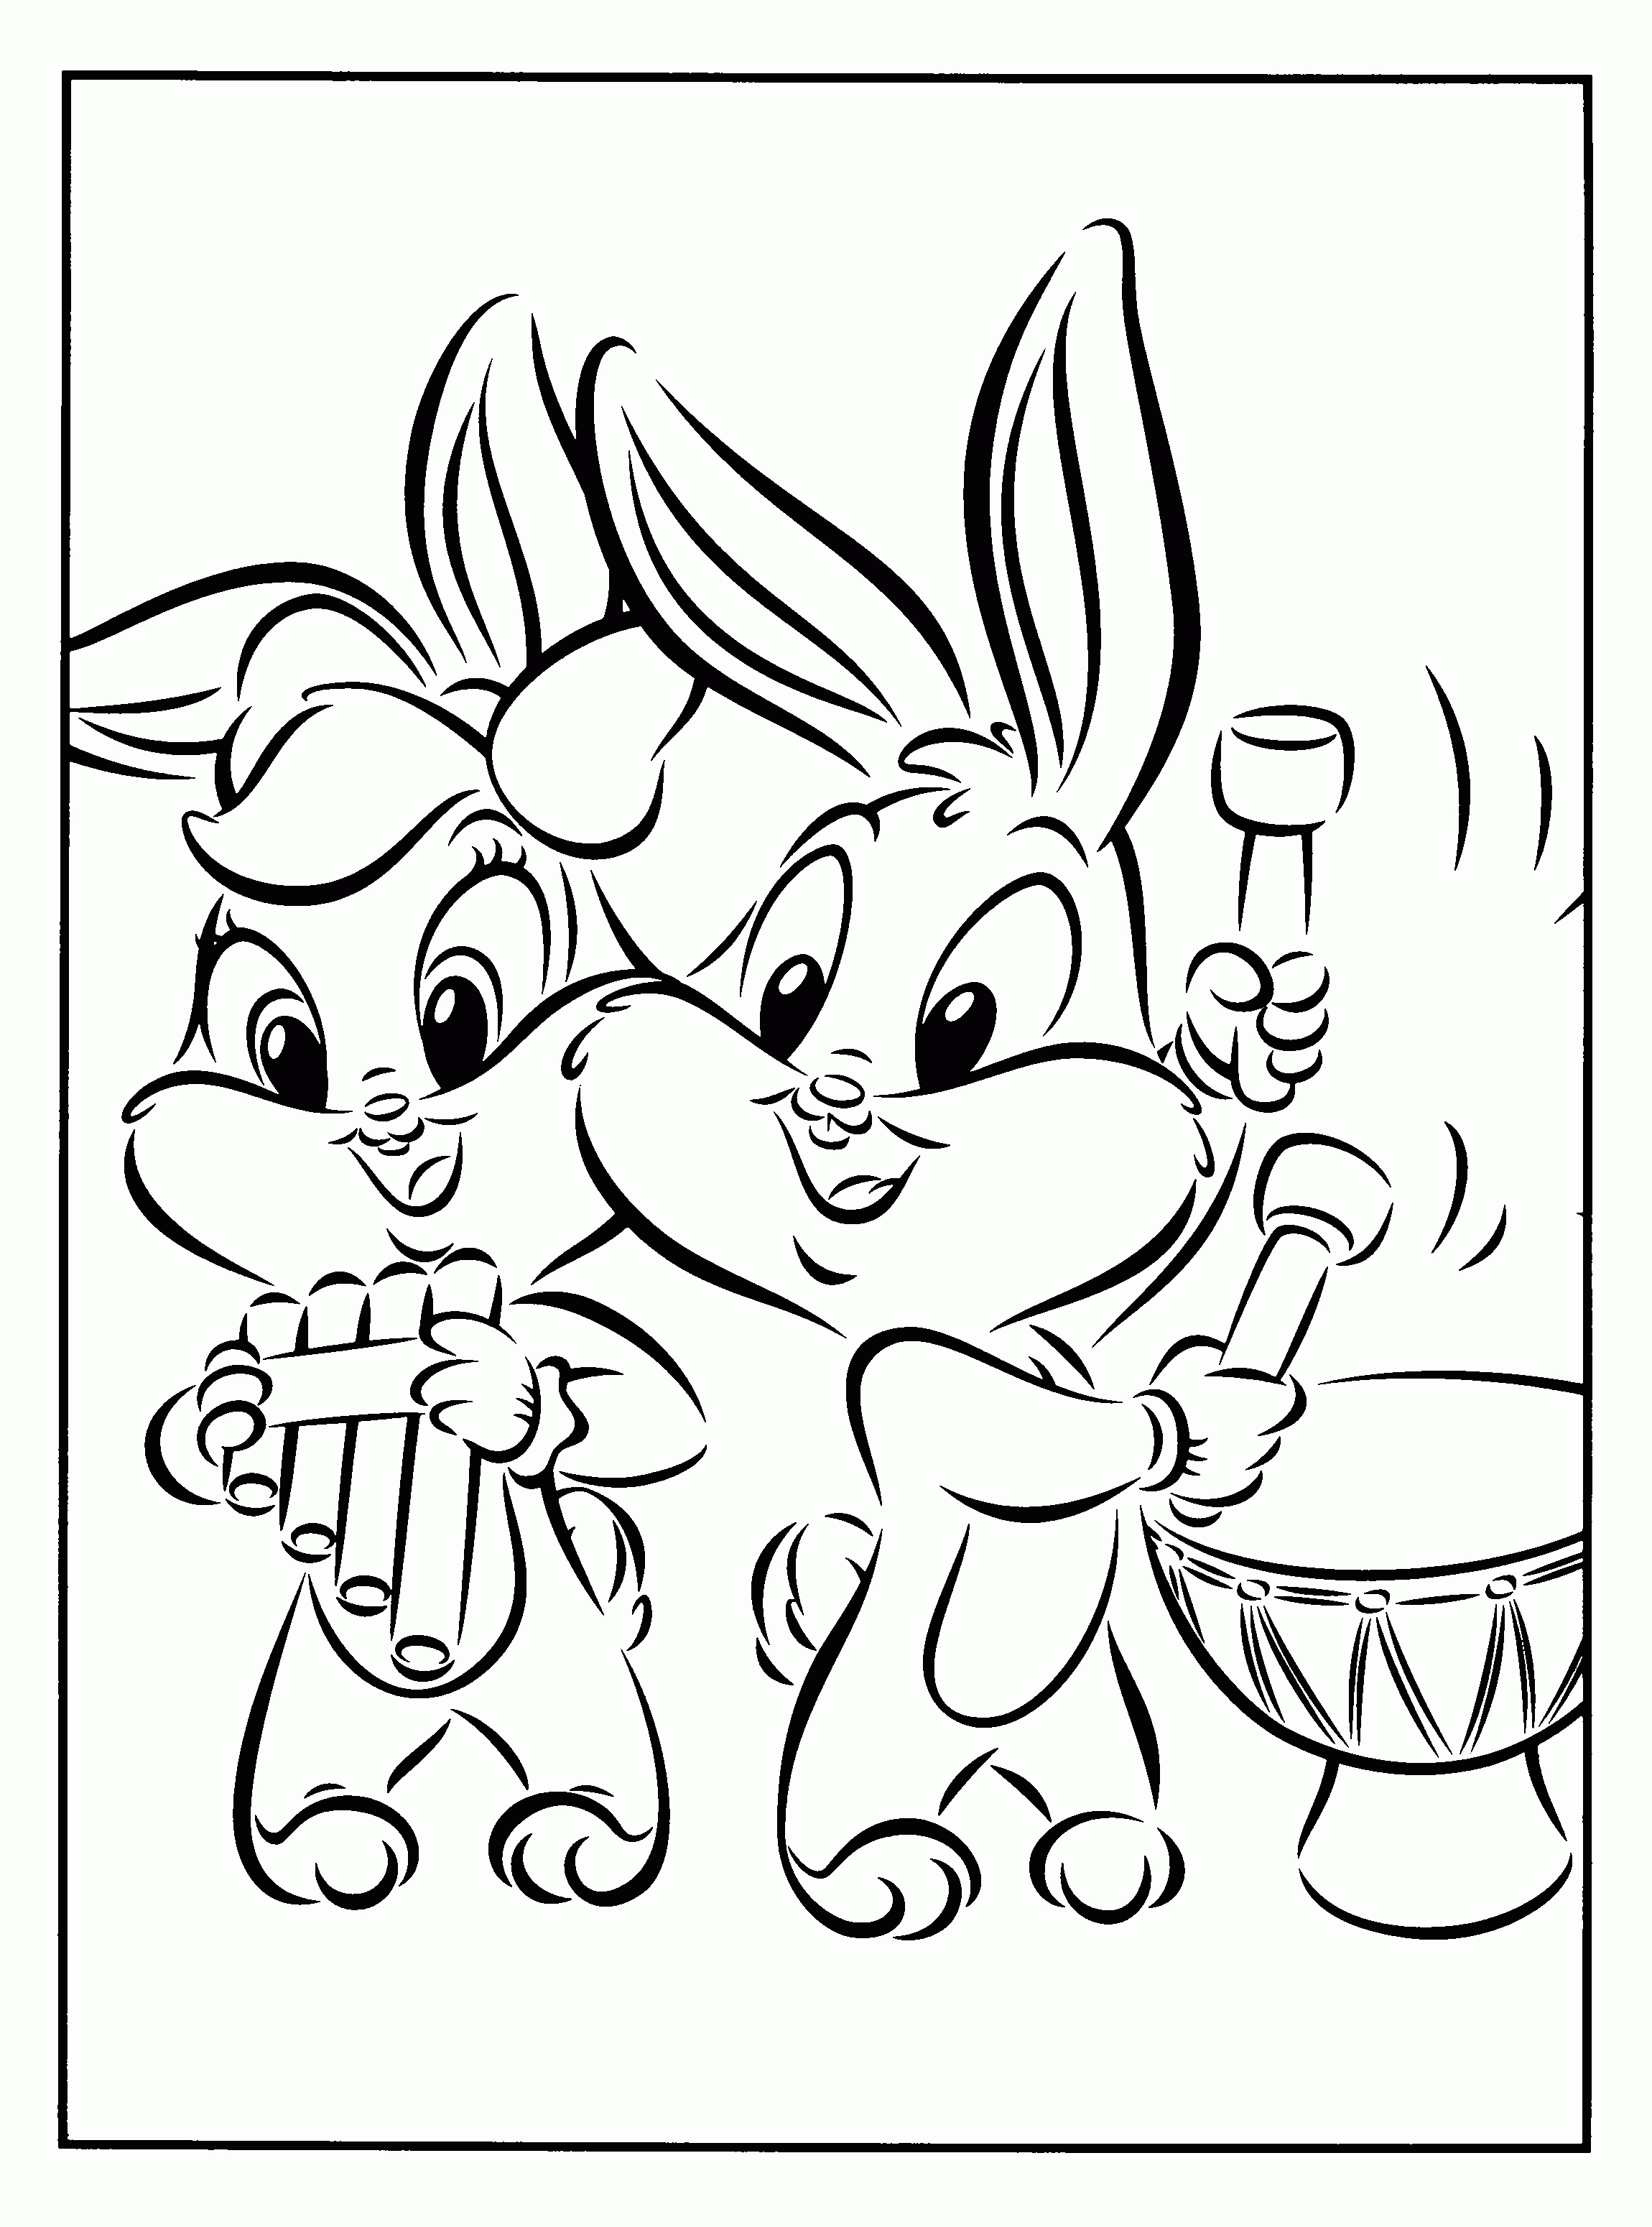 Printable Looney Tunes Coloring Pages | Coloring Me